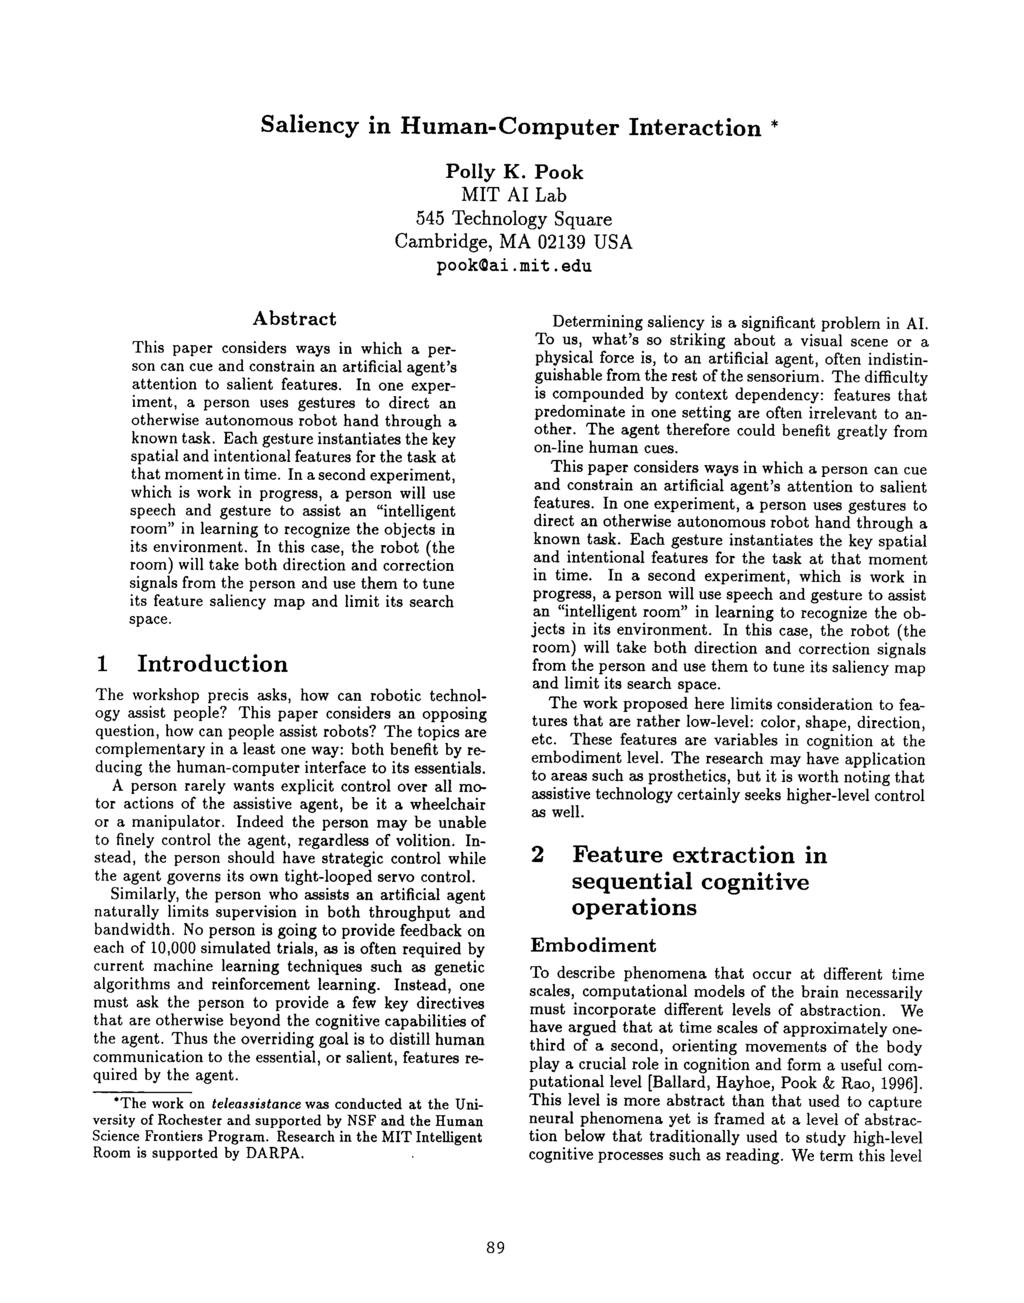 From: AAA Technical Report FS-96-05. Compilation copyright 1996, AAA (www.aaai.org). All rights reserved. Saliency in Human-Computer nteraction * Polly K.